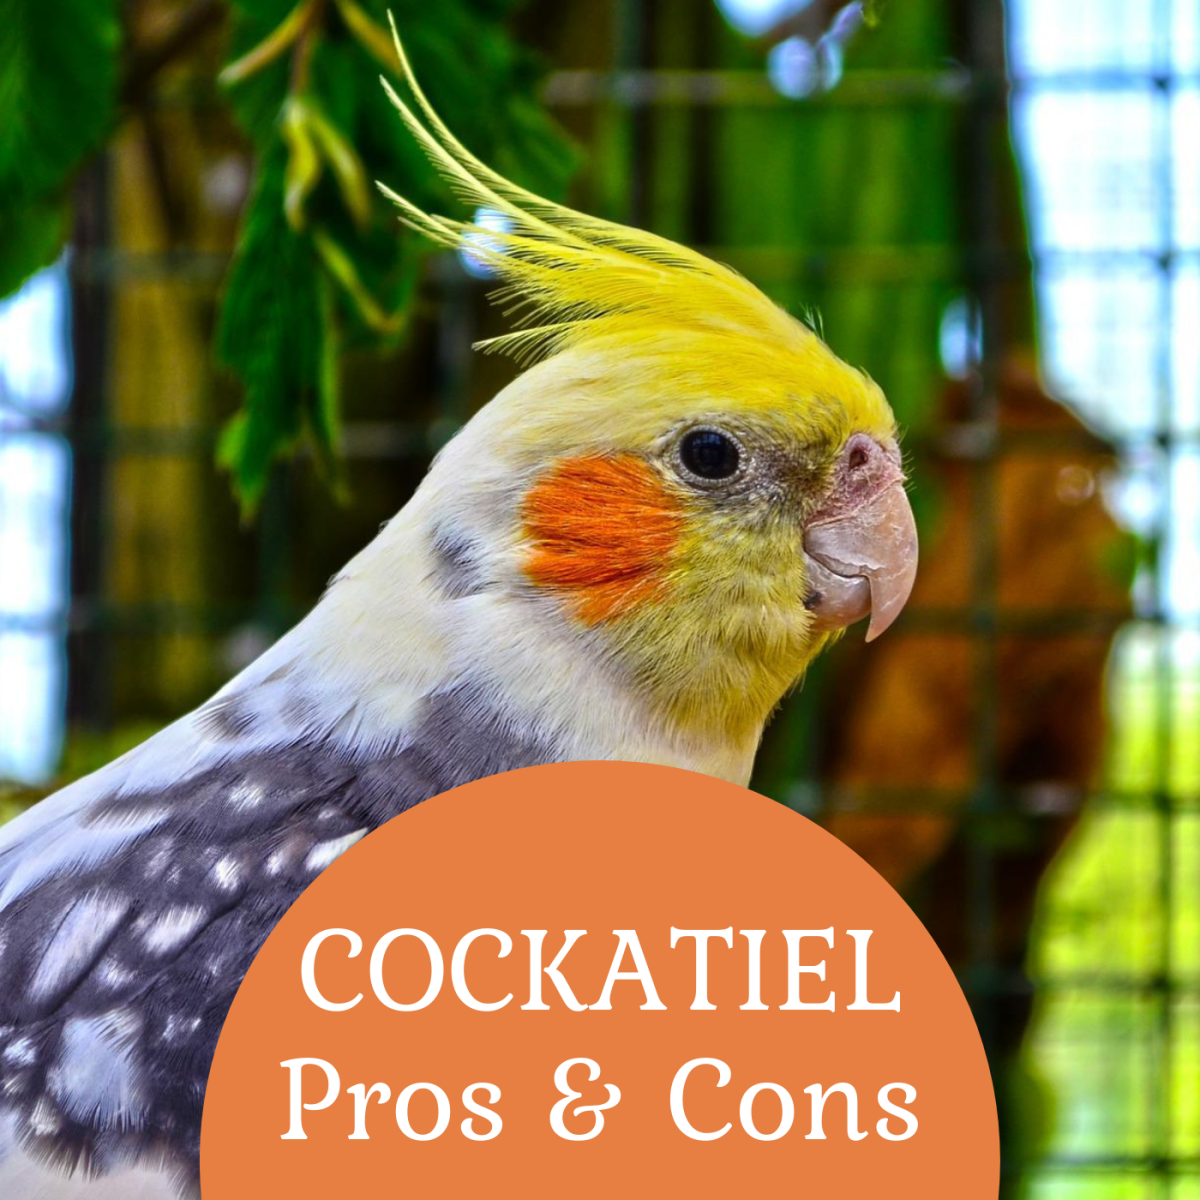 Cockatiels are cute, funny, and loving pets, but they require a lot of time and attention. Is this the right pet for you? 